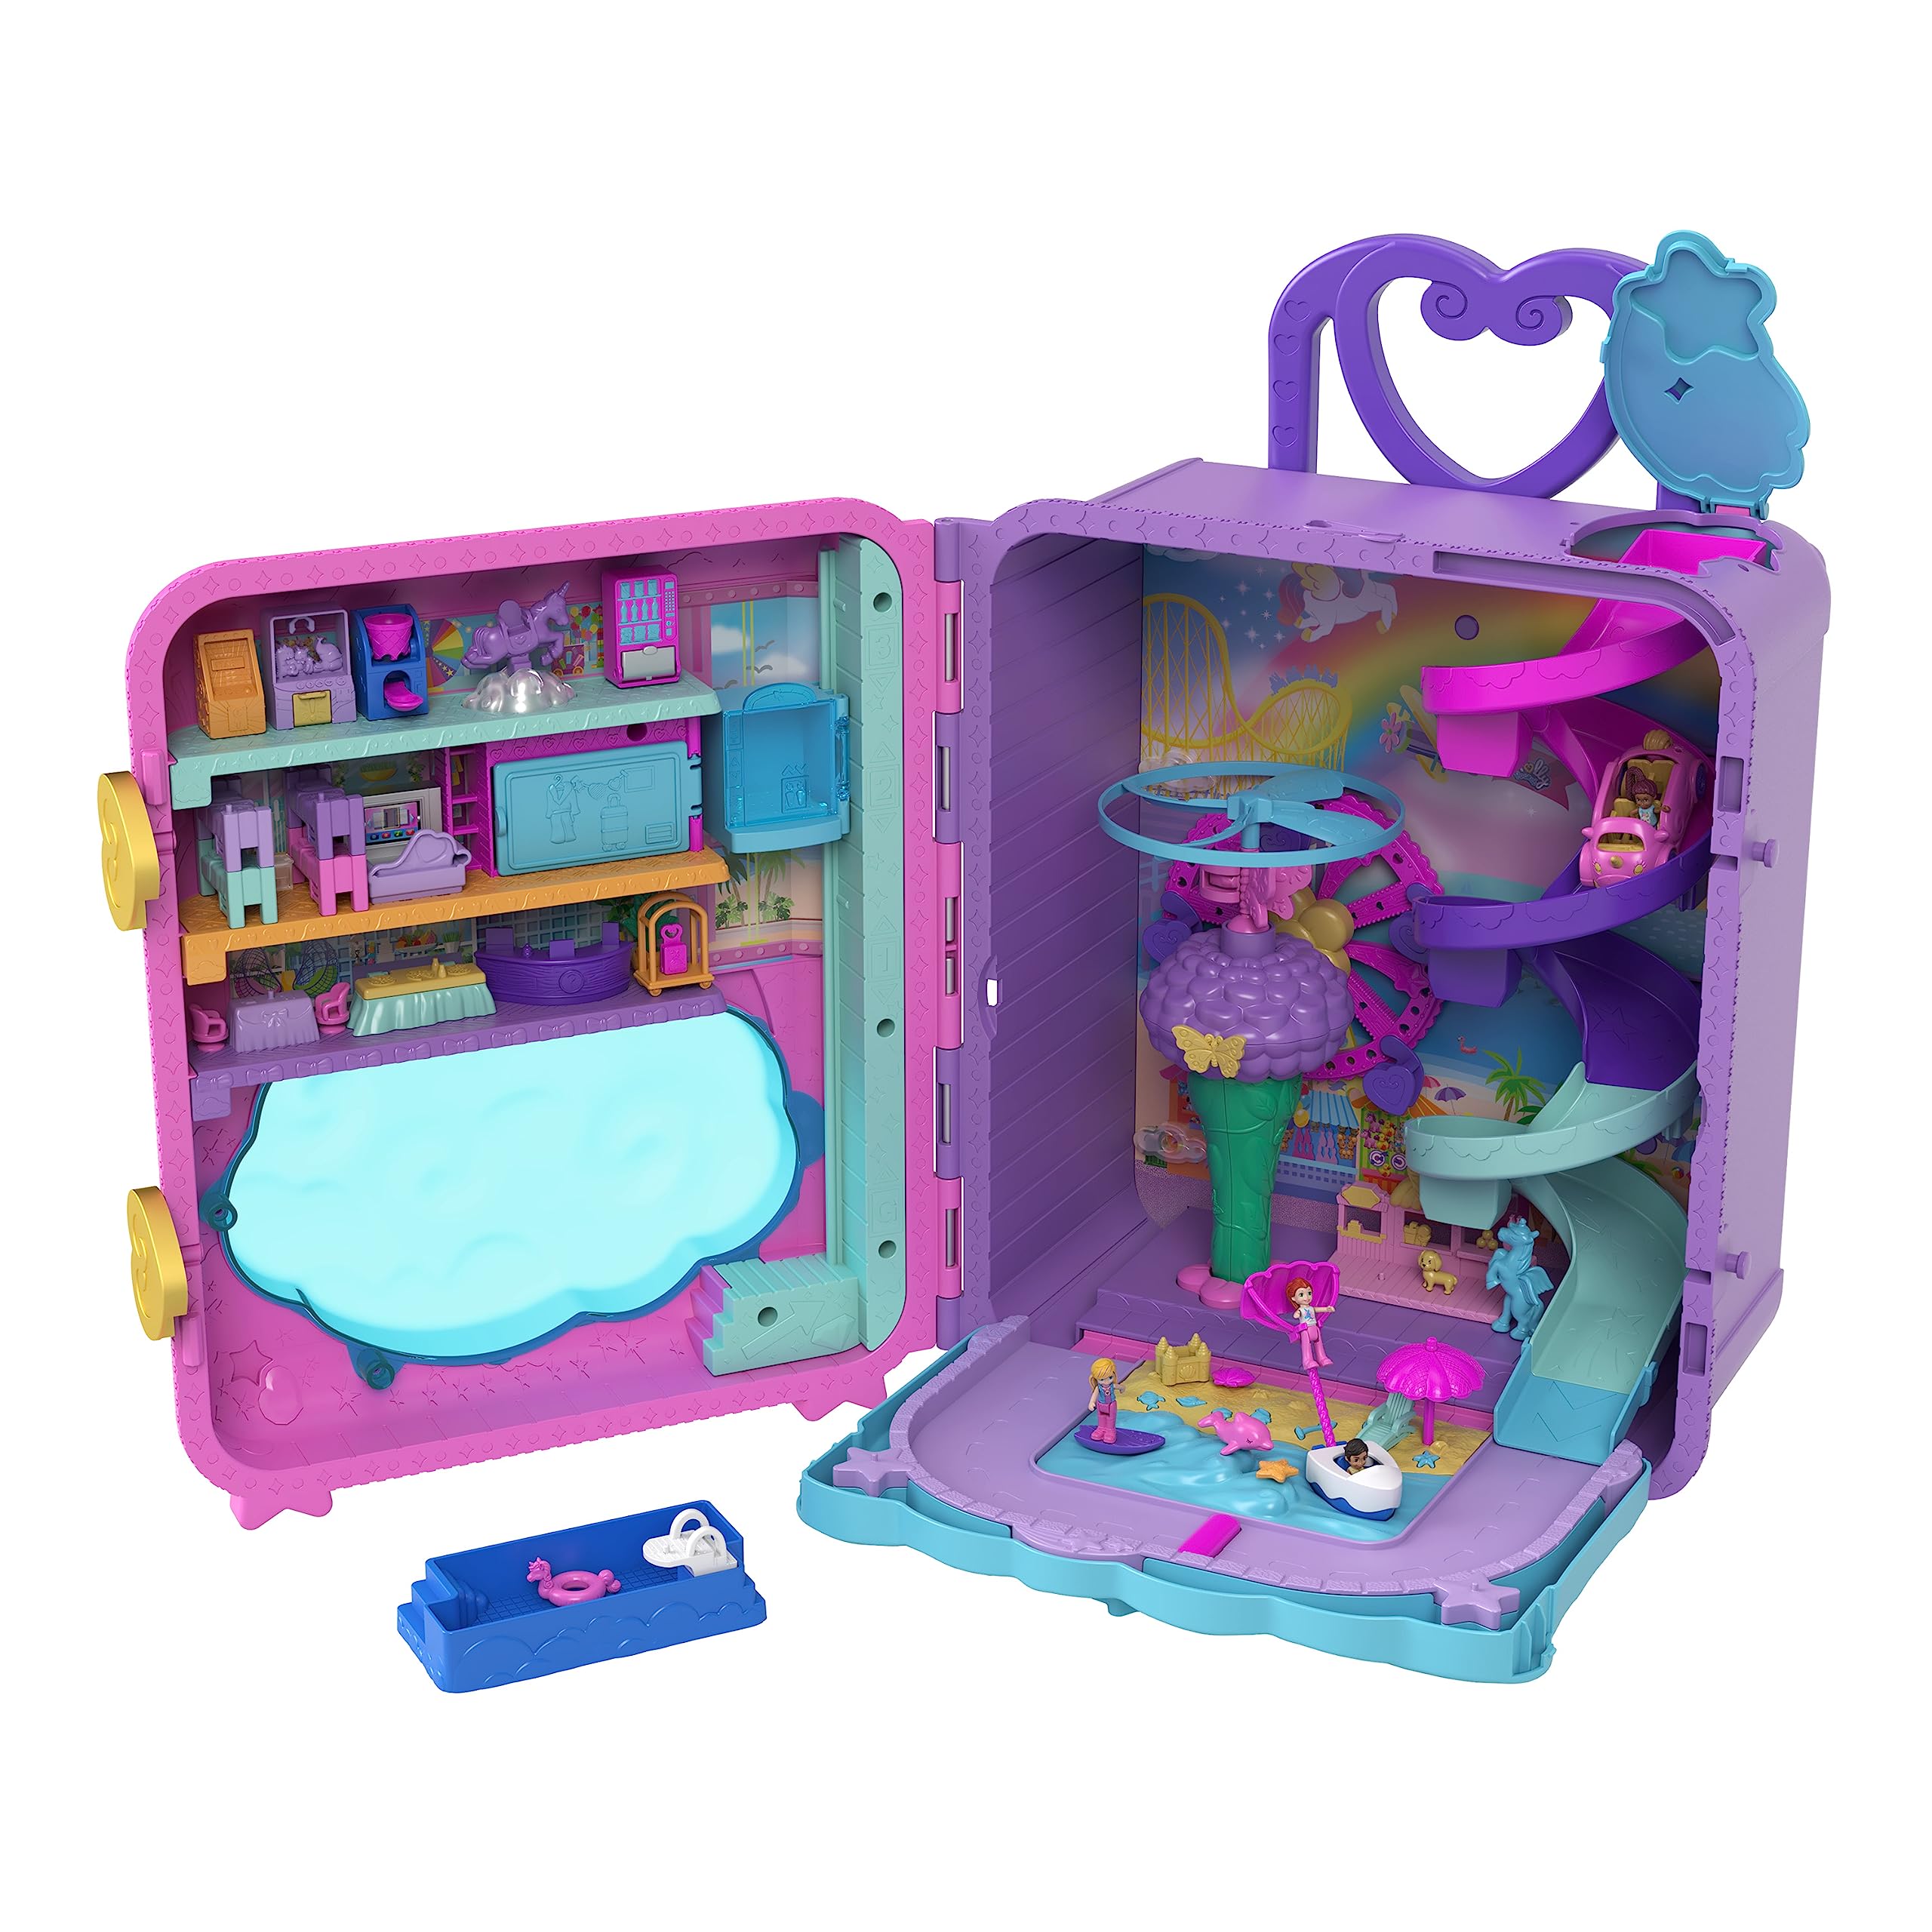 Polly Pocket Dolls, Playset and Travel Toys, 4 Dolls, 1 Vehicle, 25+ Accessories, Resort Roll Away